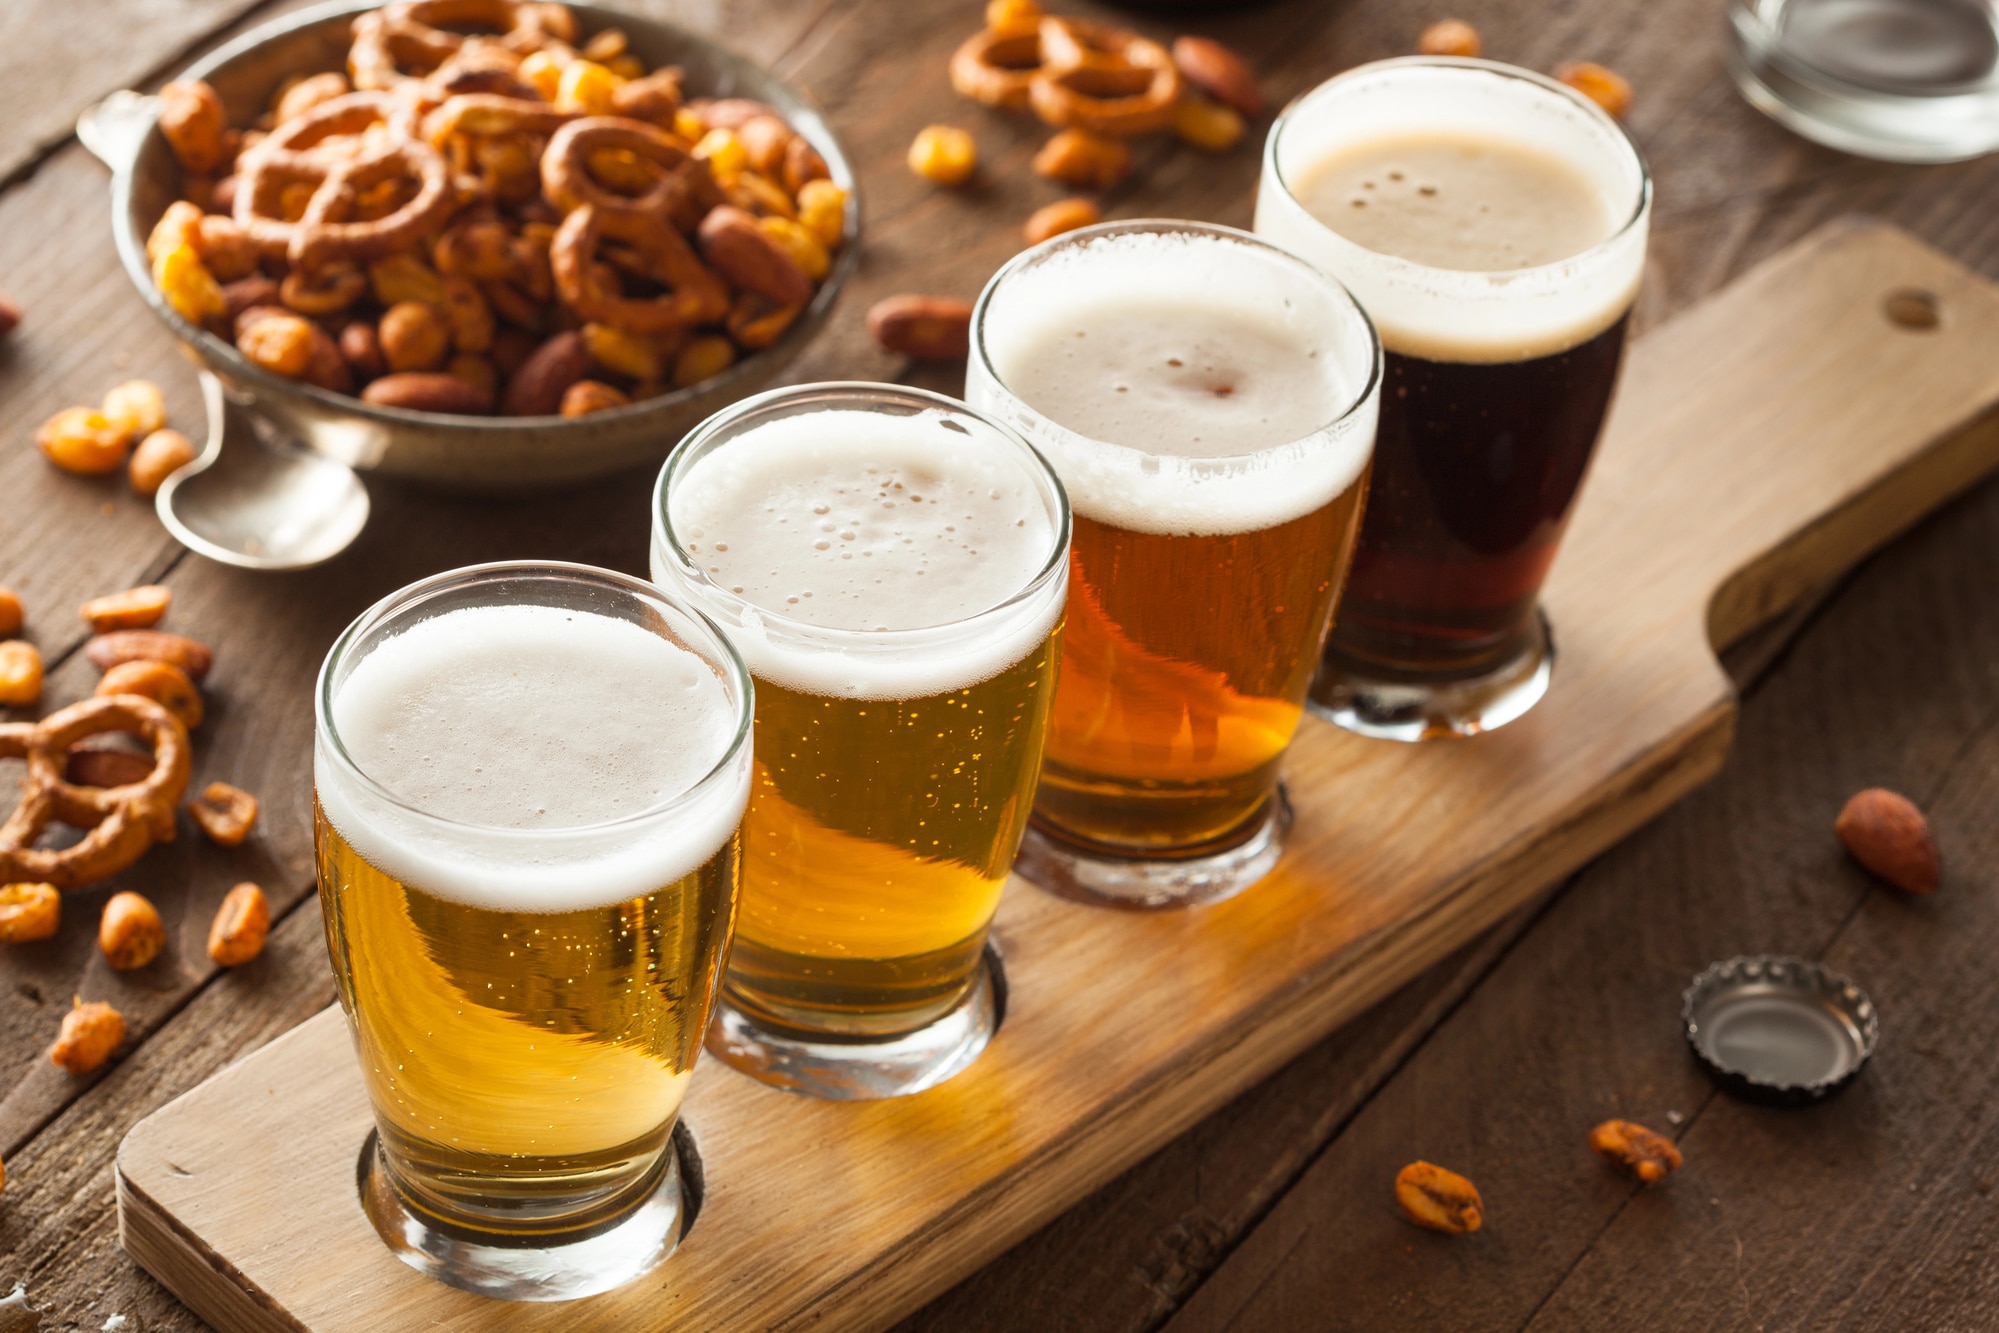 horizontal image of a flight of ales with some snacks in bowls on the table